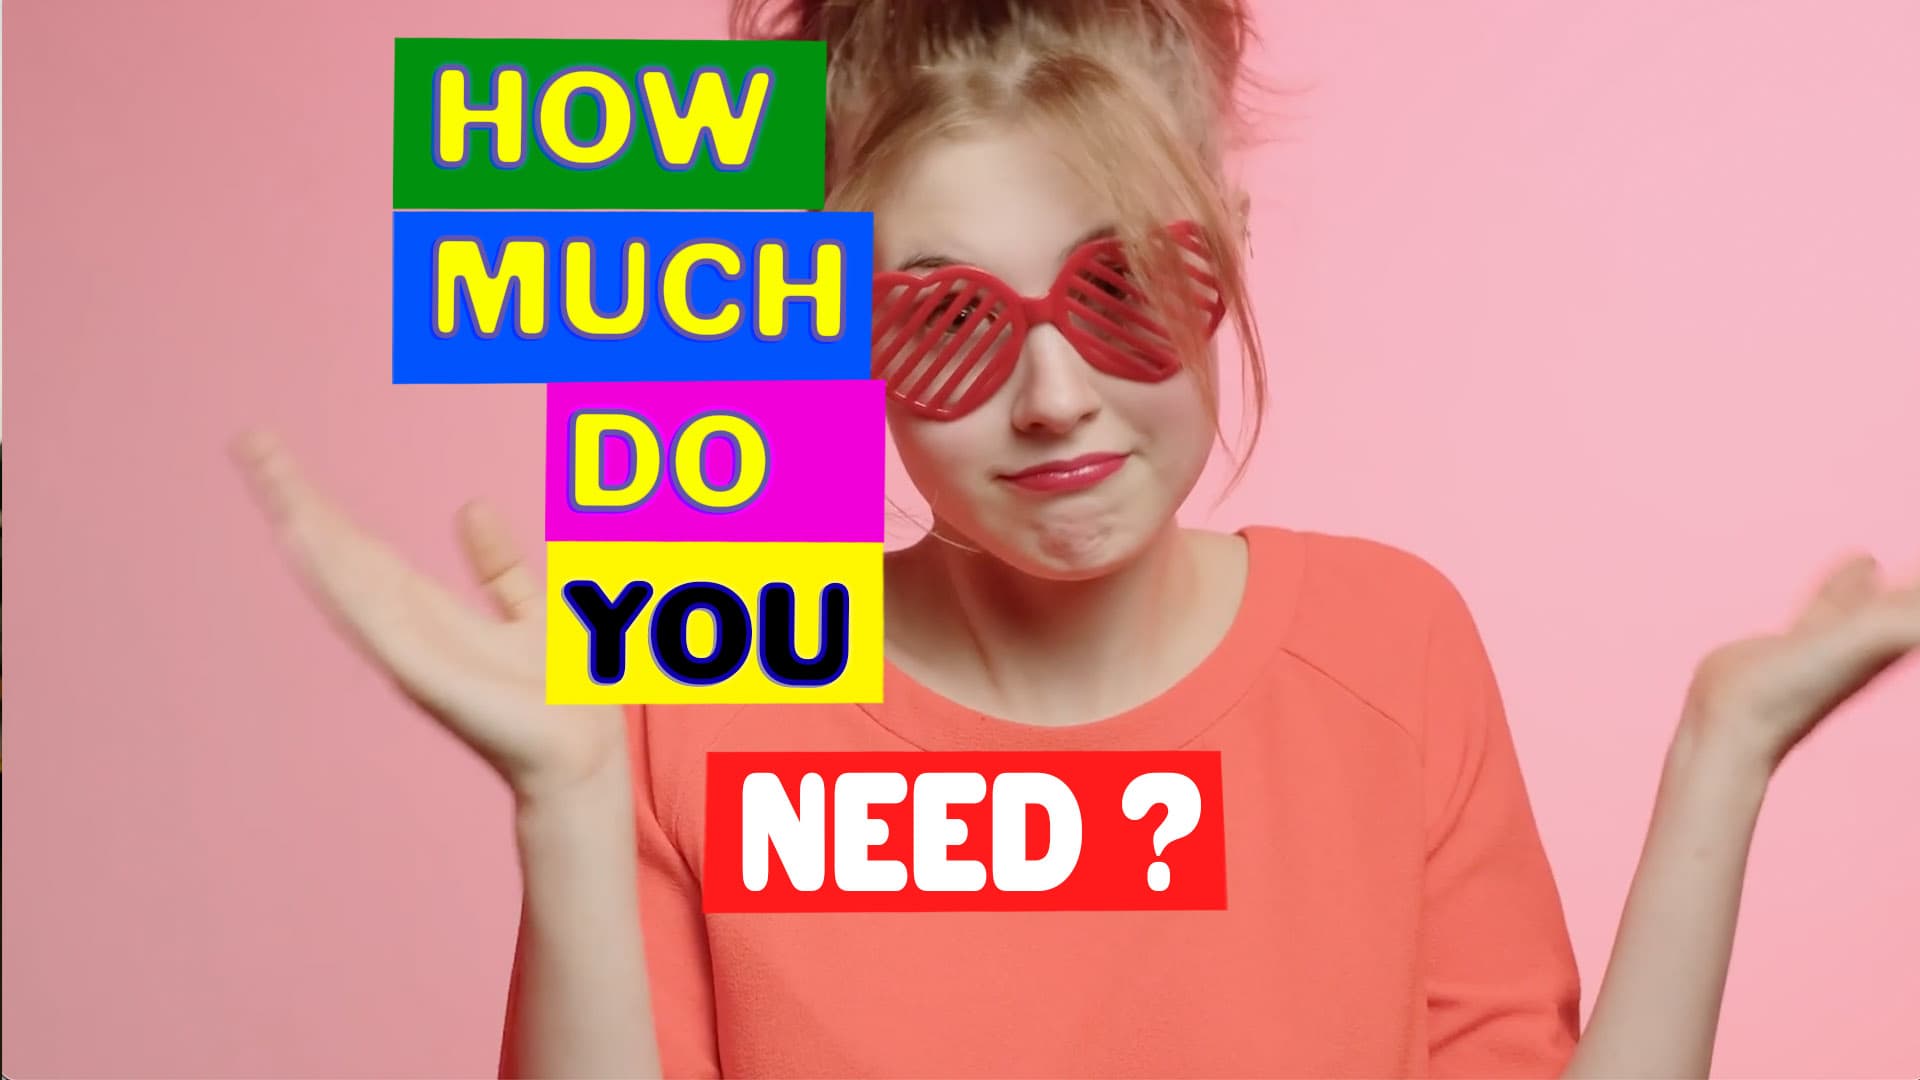 how much do you need?